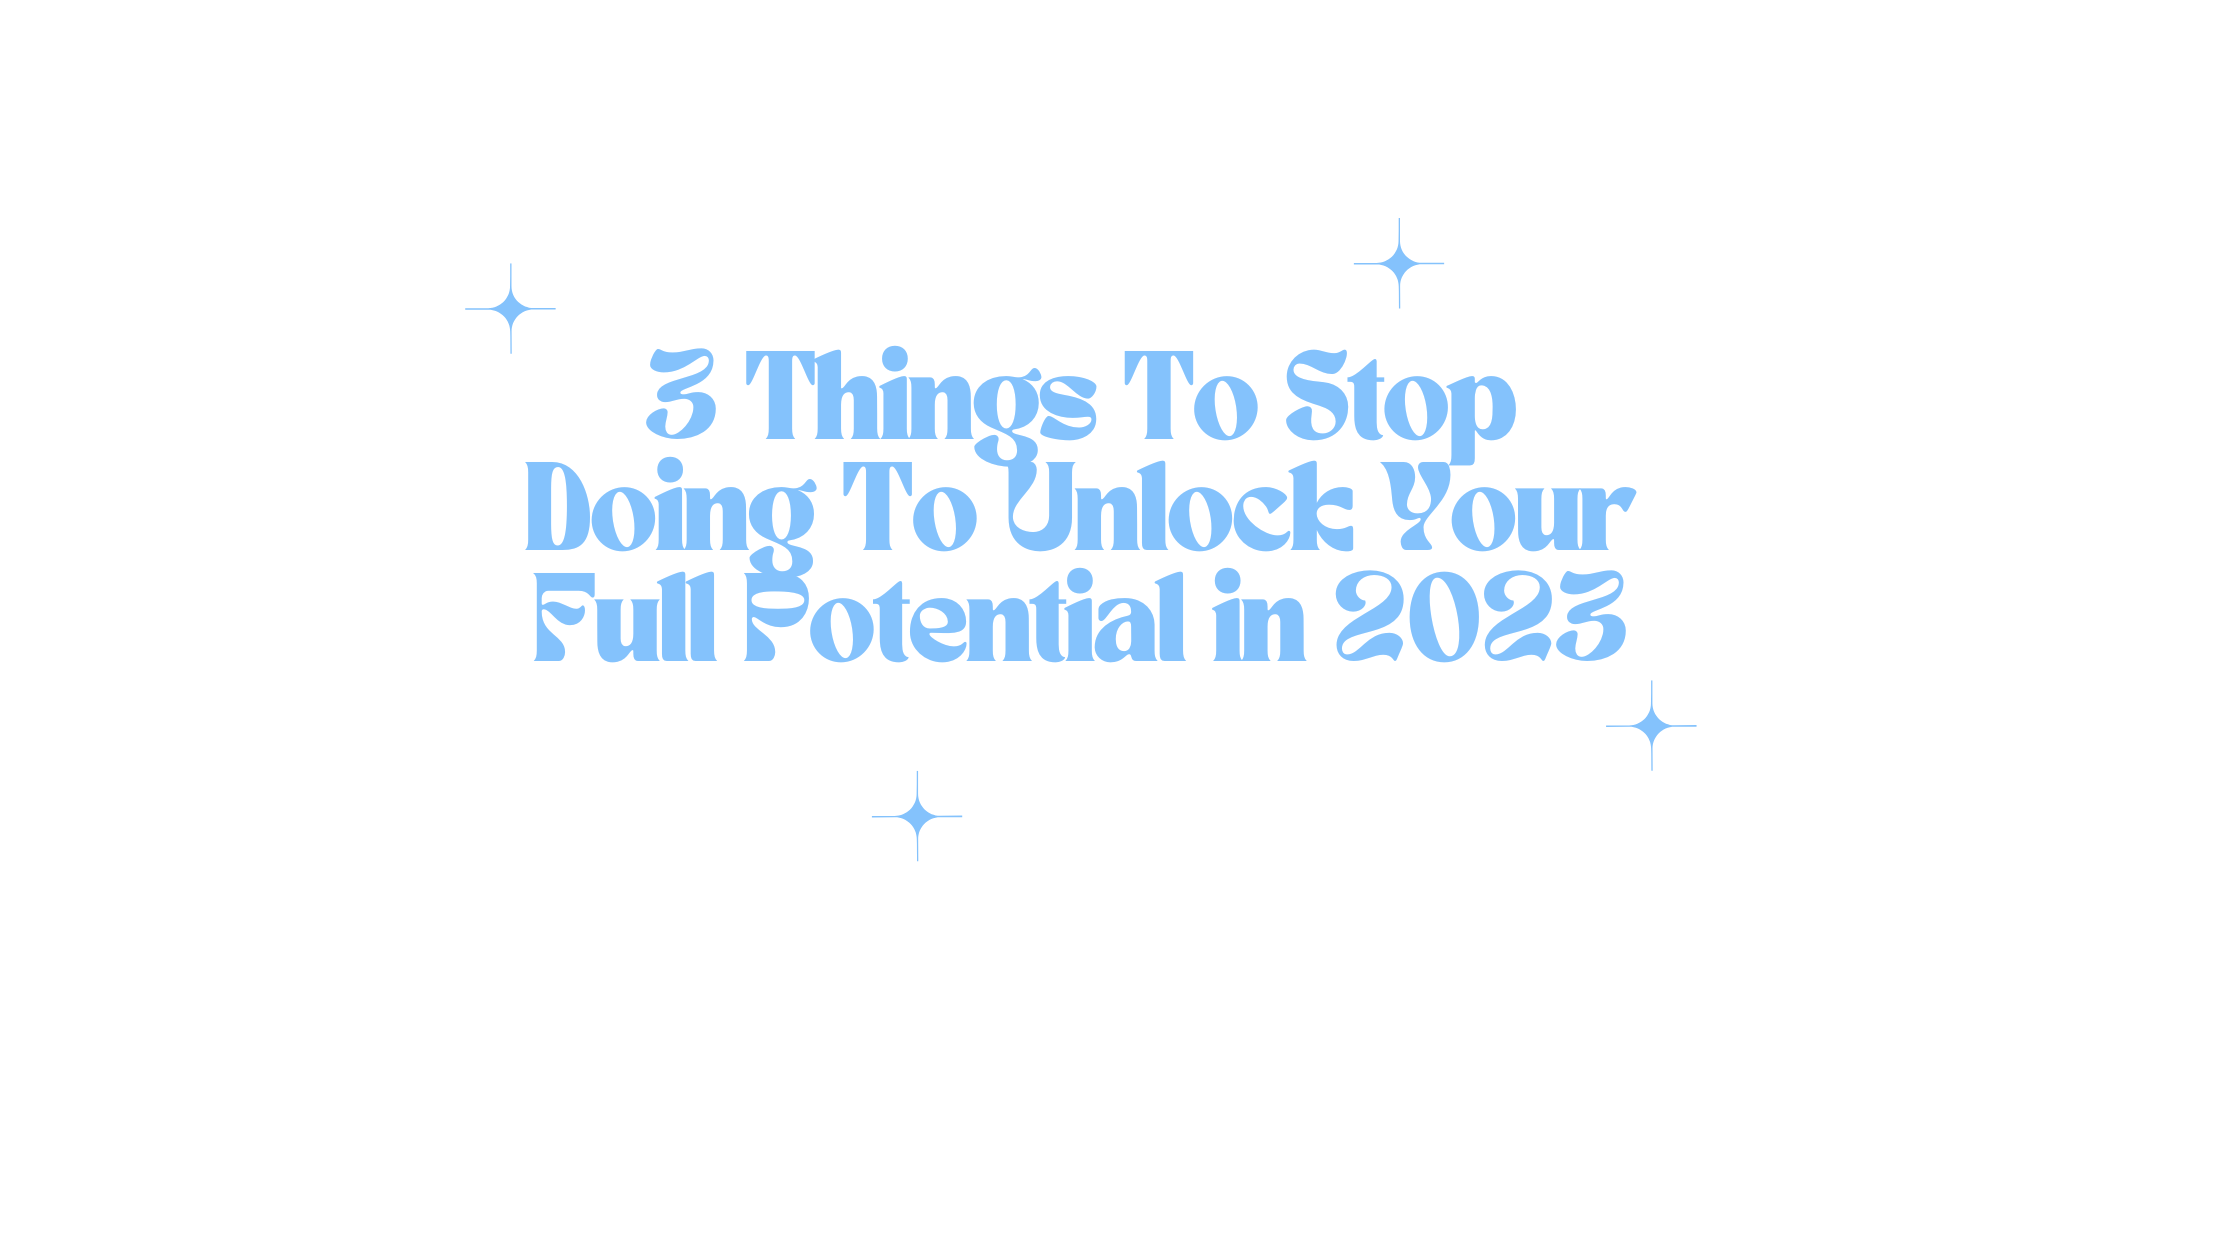 3 Things To Stop Doing To Unlock Your Full Potential in 2023